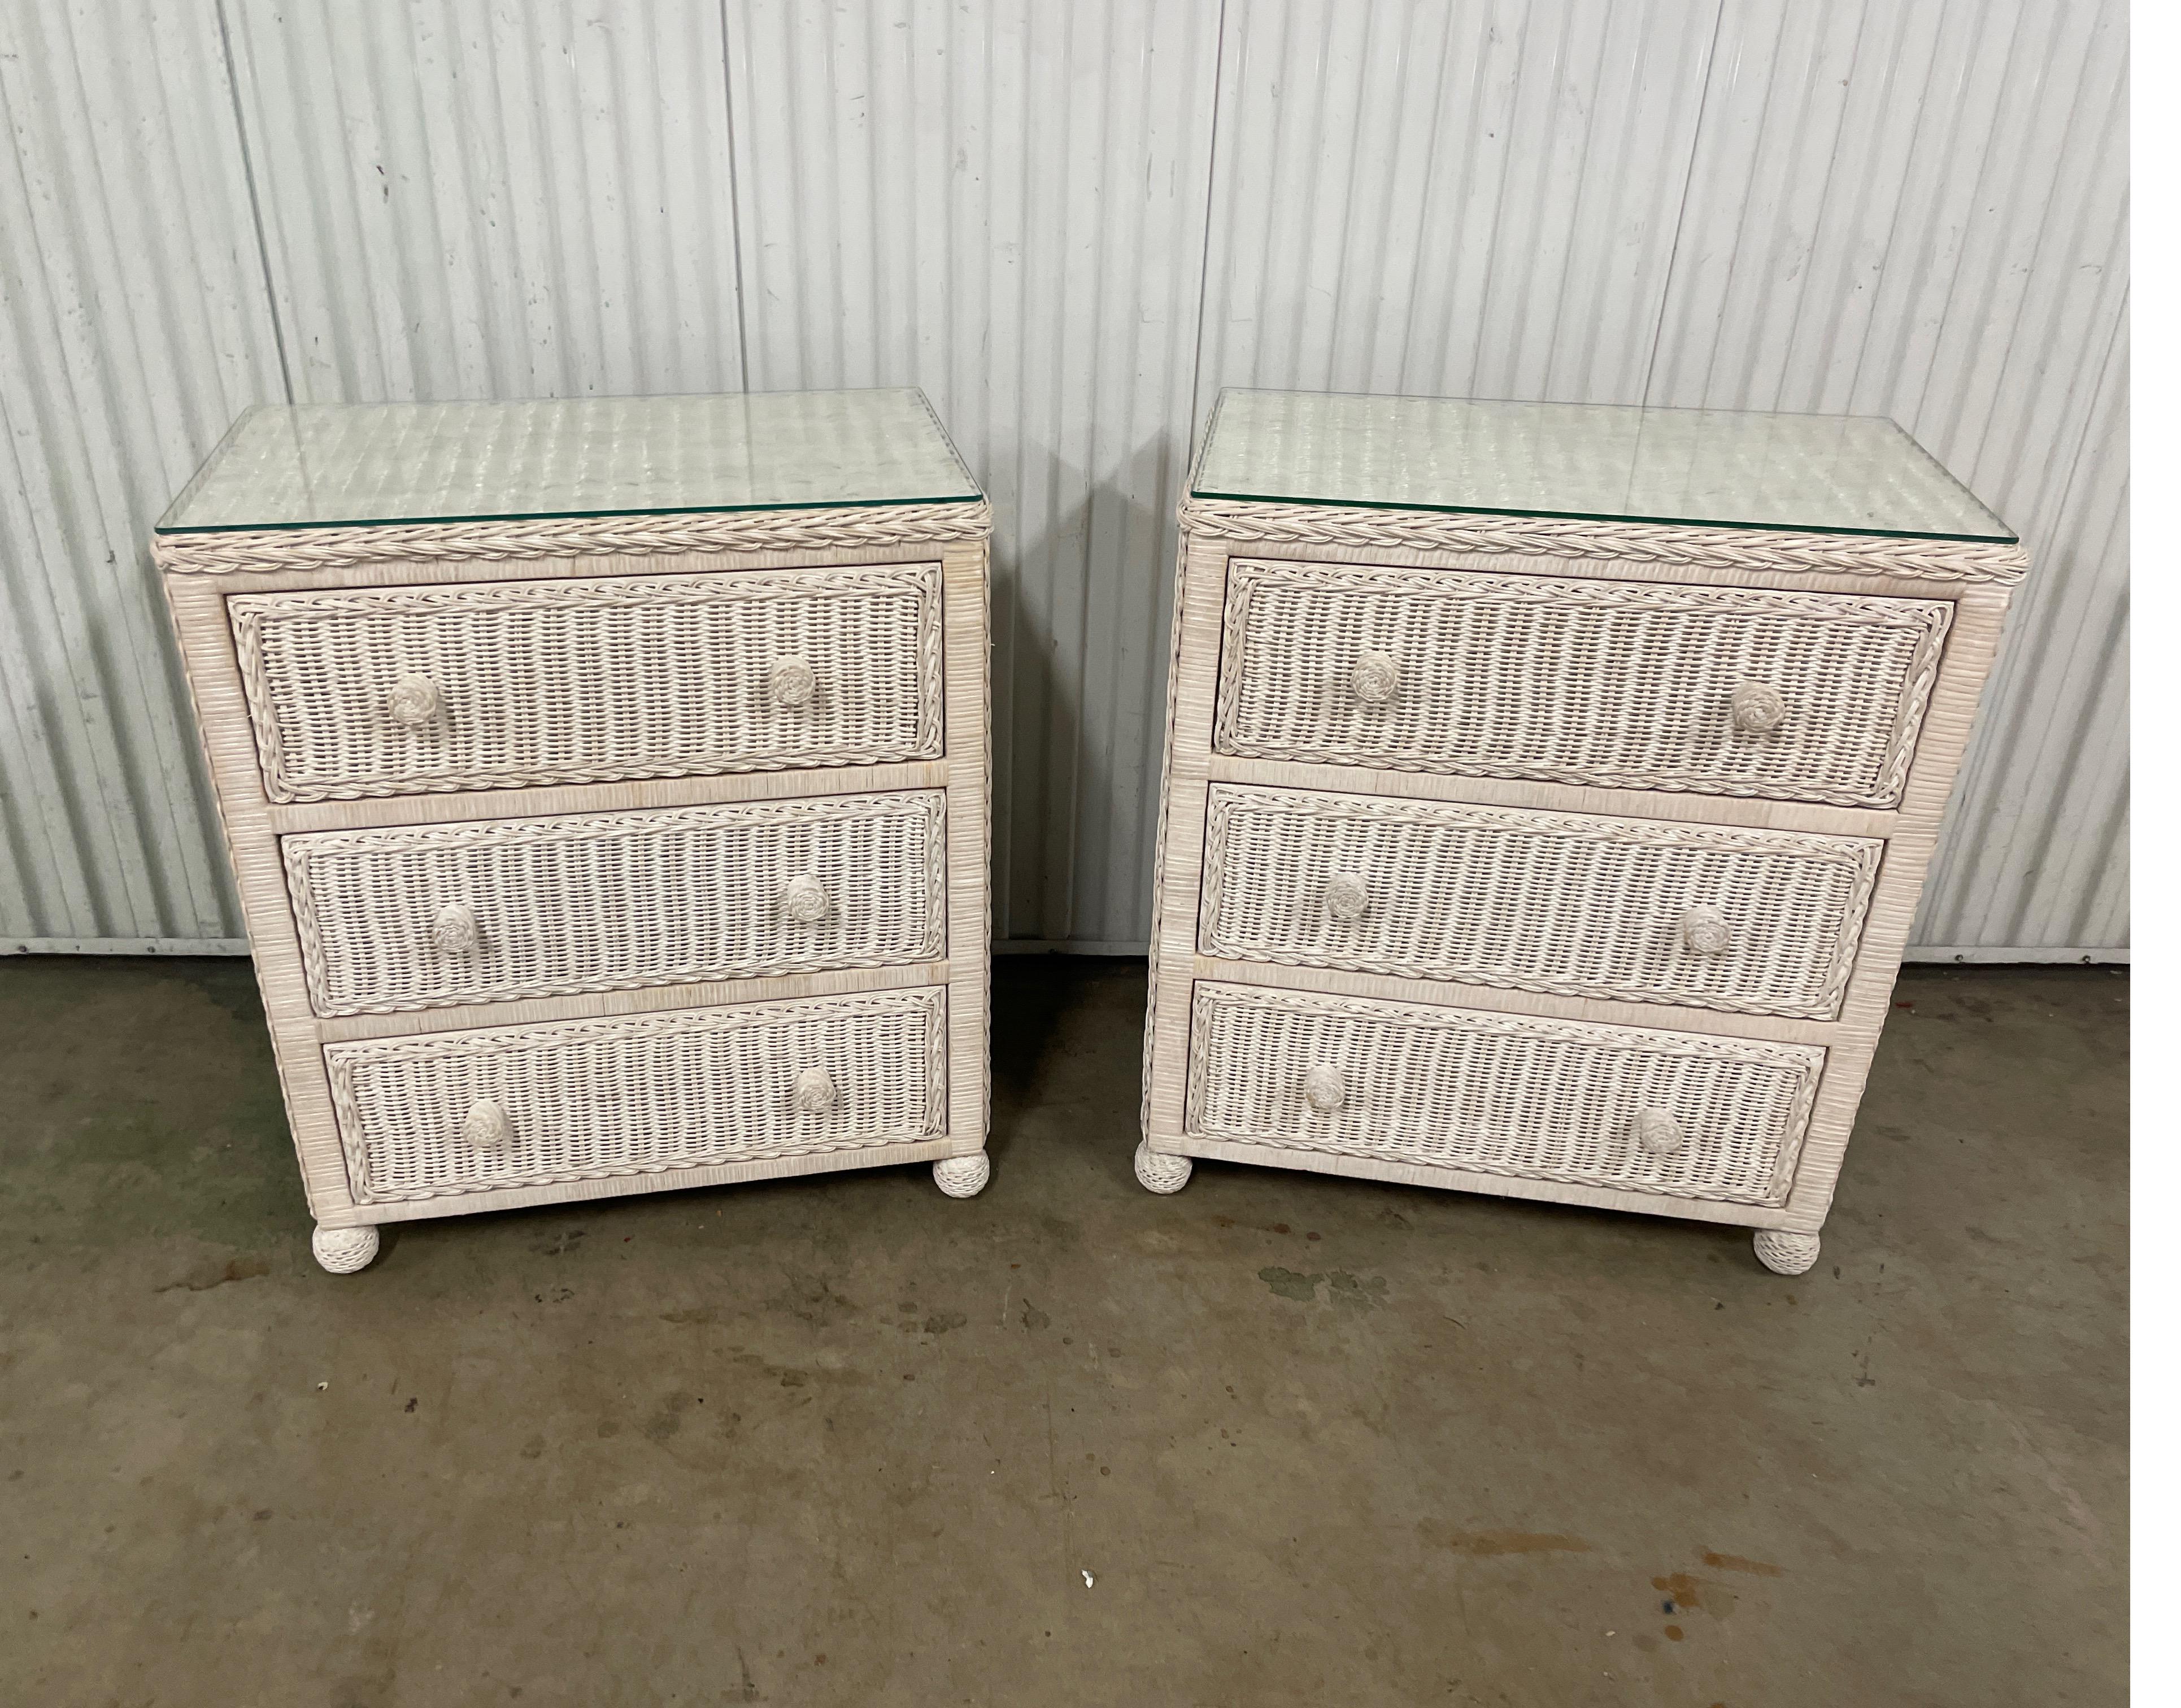 Pair of white wicker three drawer nightstands / dressers. These nice cottage chests will work well as either large nightstands or a pair of smaller dressers. They are well constructed and in very good condition.